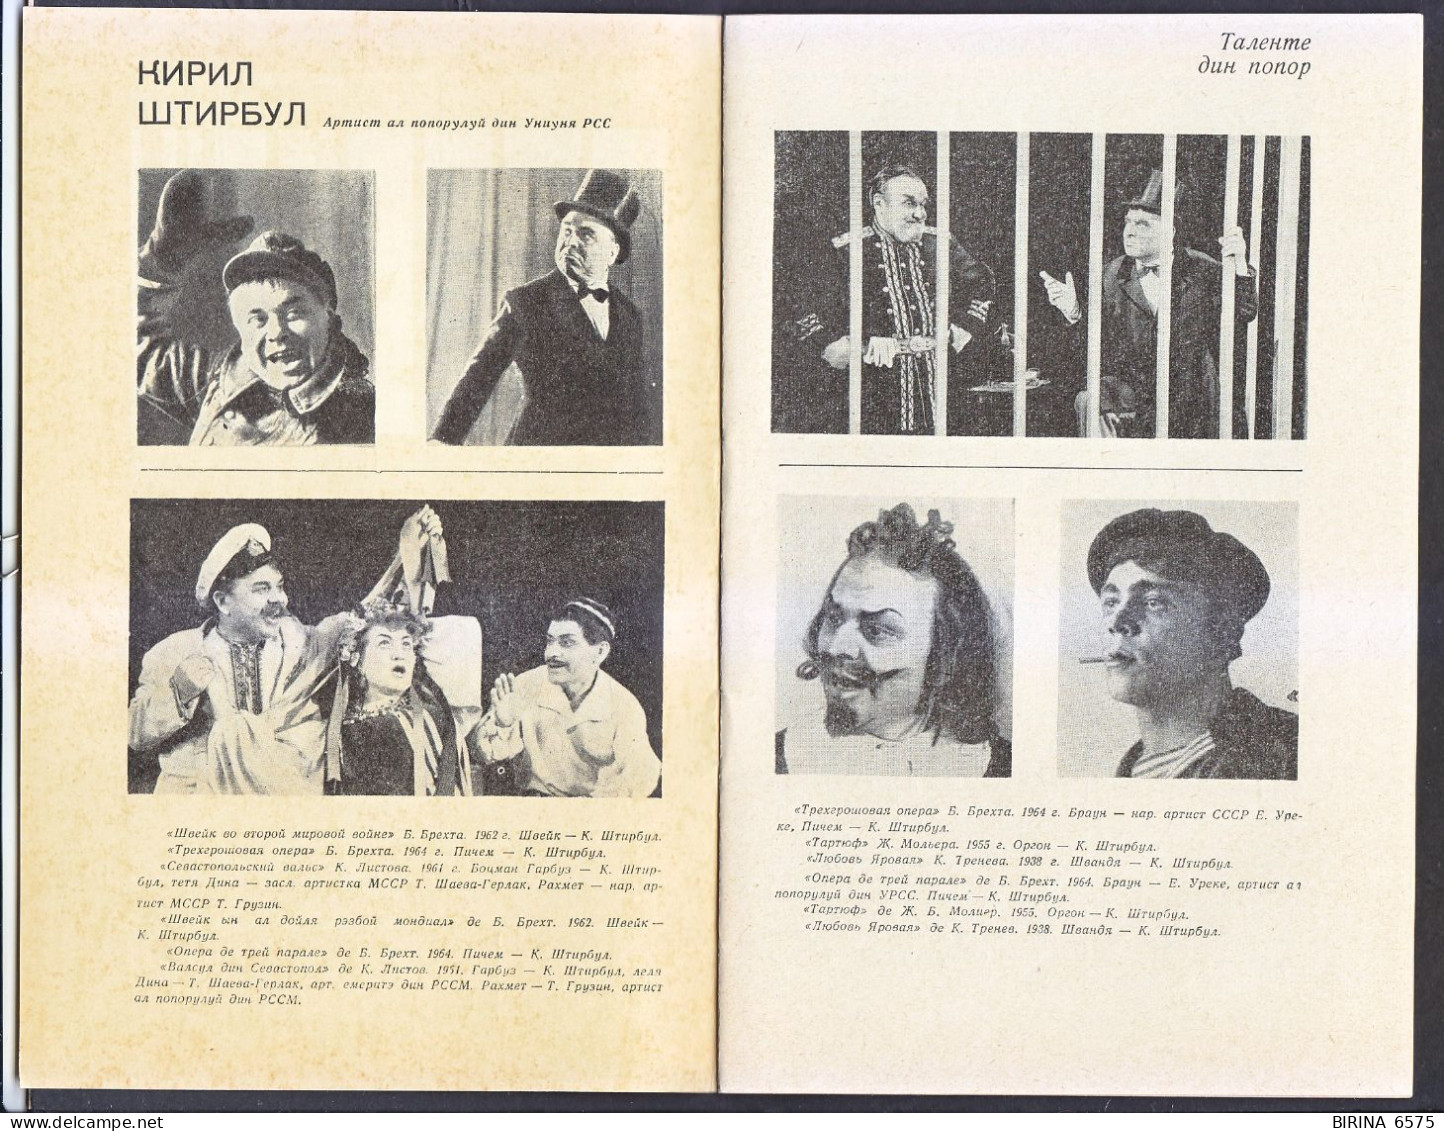 BROCHURE. PEOPLE'S ARTIST OF THE USSR. K. STIRBUL. CHISINAU. IN RUSSIAN AND MOLDOVAN. - 7-29-i - Theater